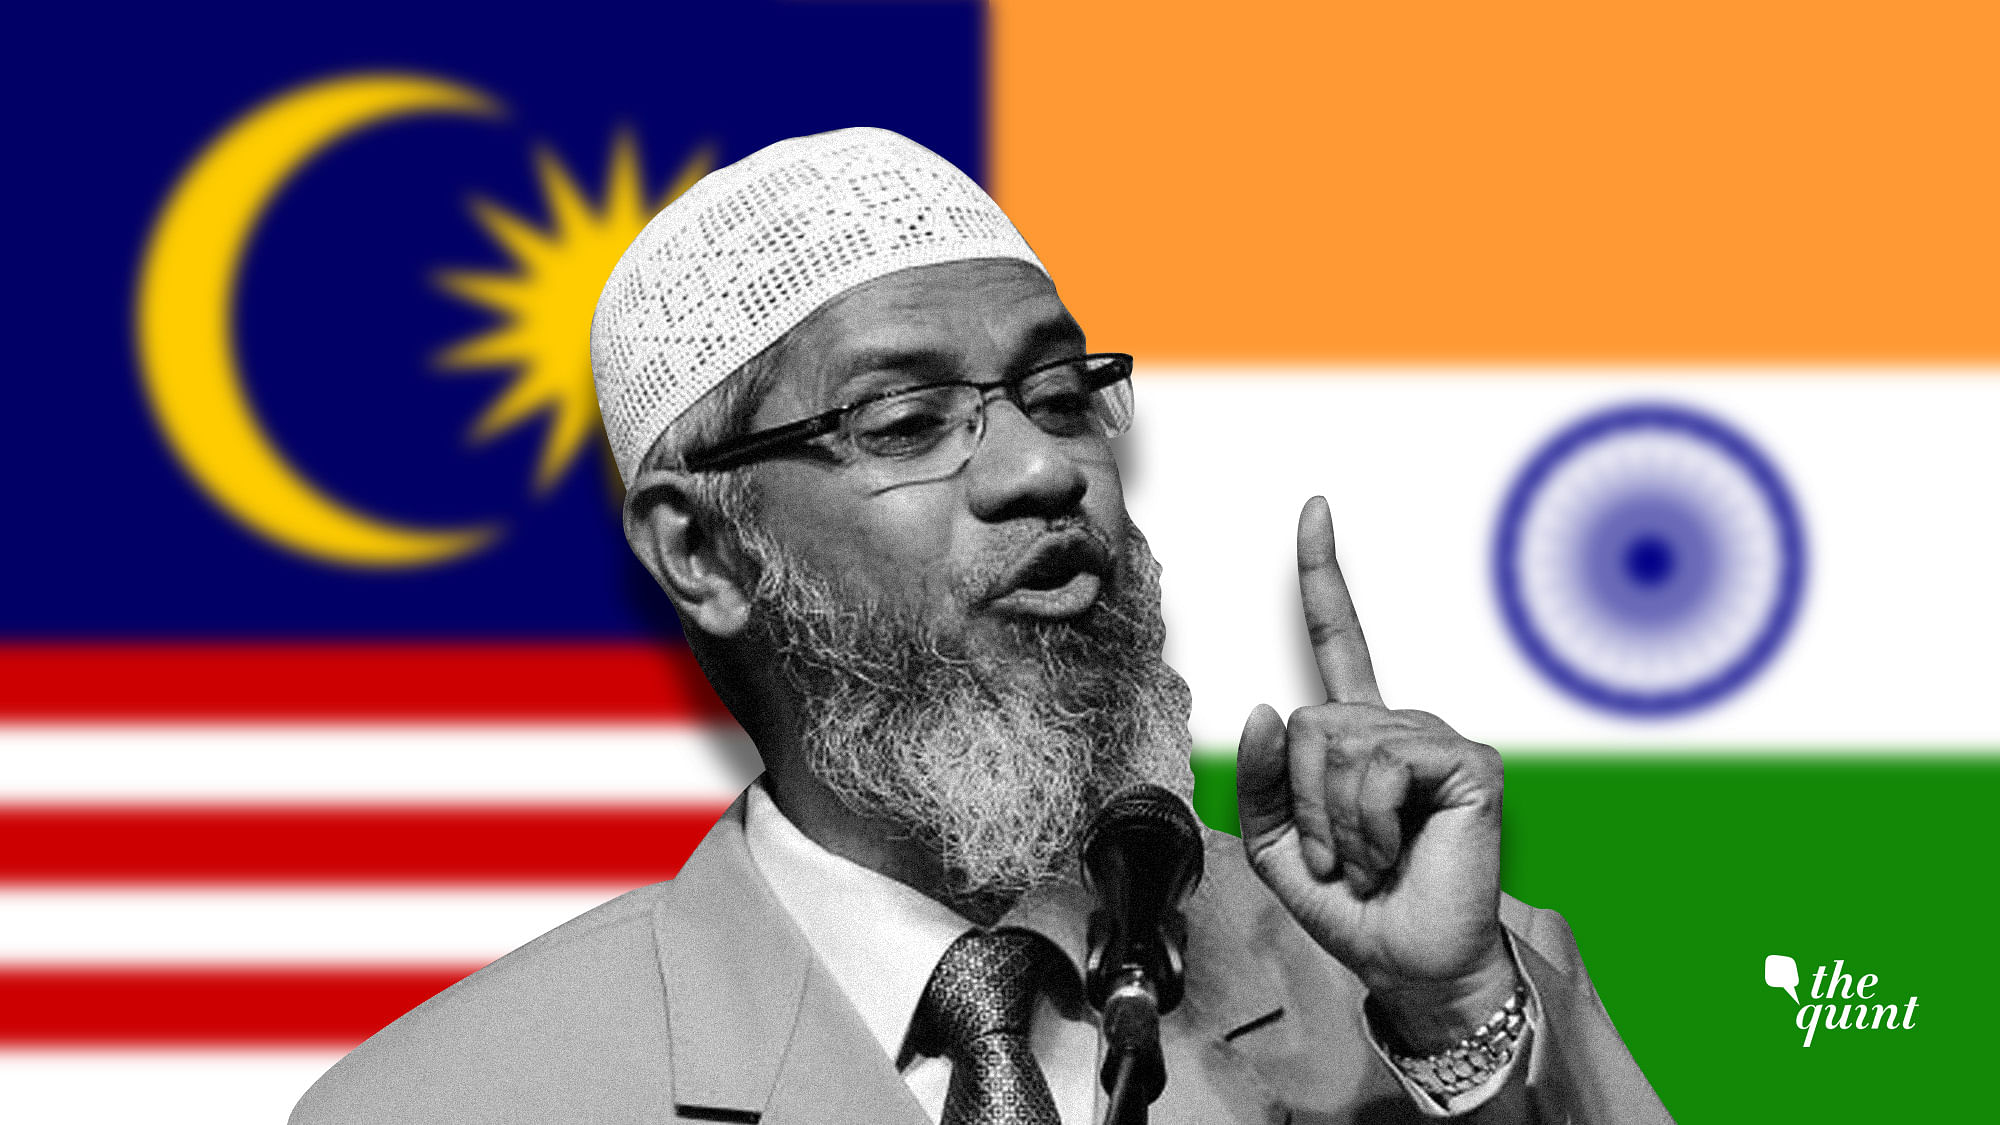 Image of Islamic preacher Zakir Naik used for representational purposes, against background of Indian and Malaysian flags.